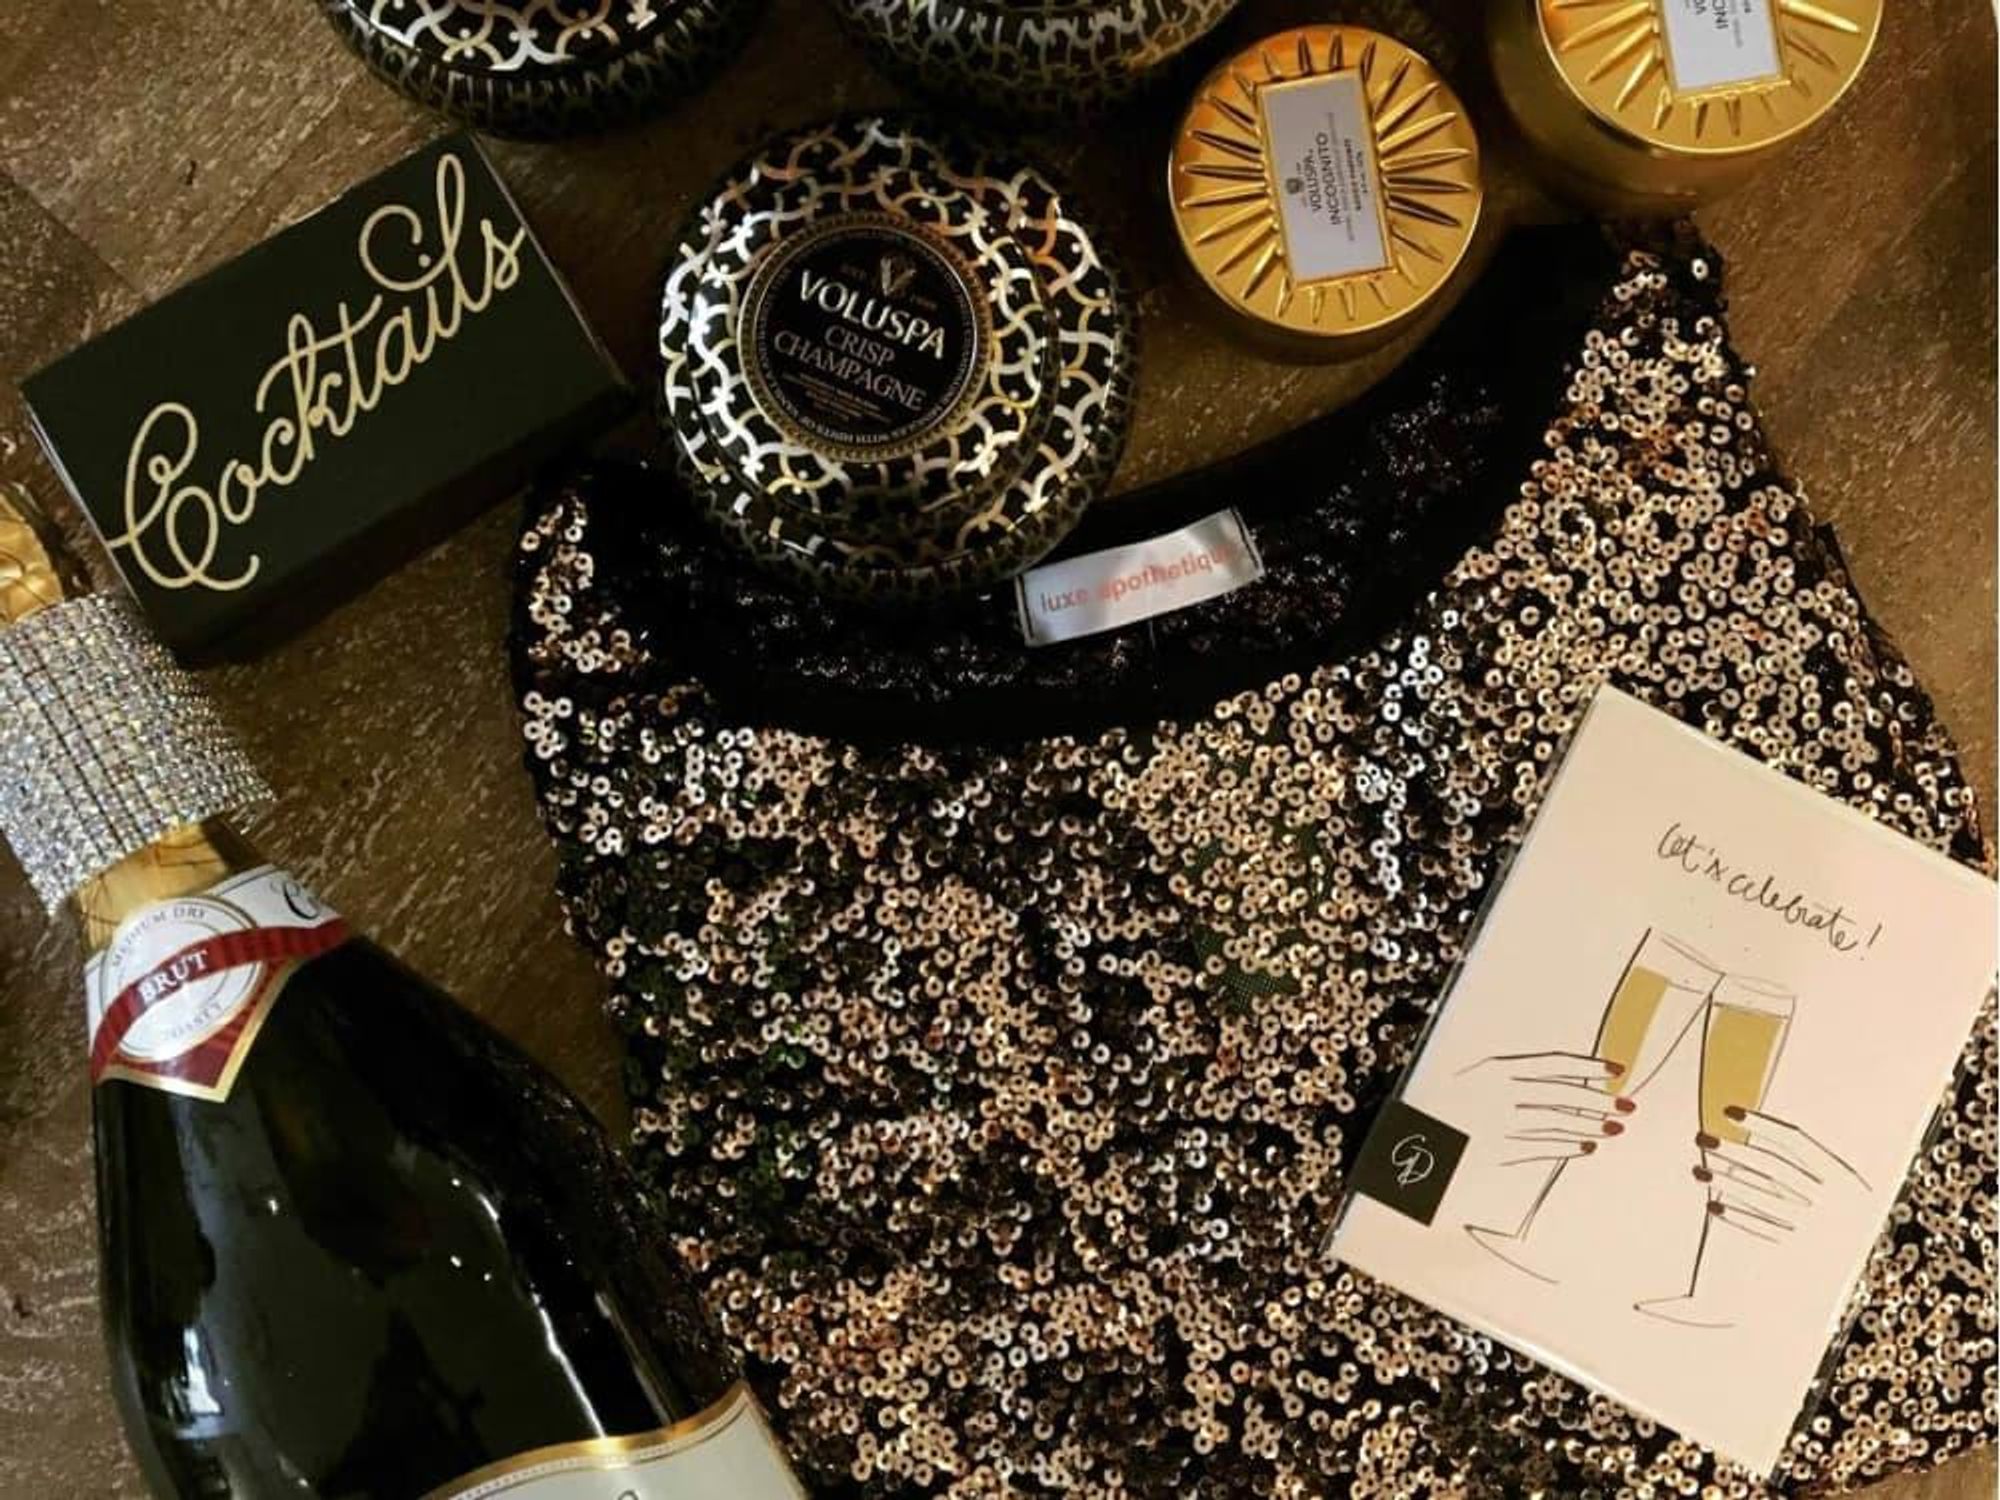 Luxe Apothetique merchandise and champagne